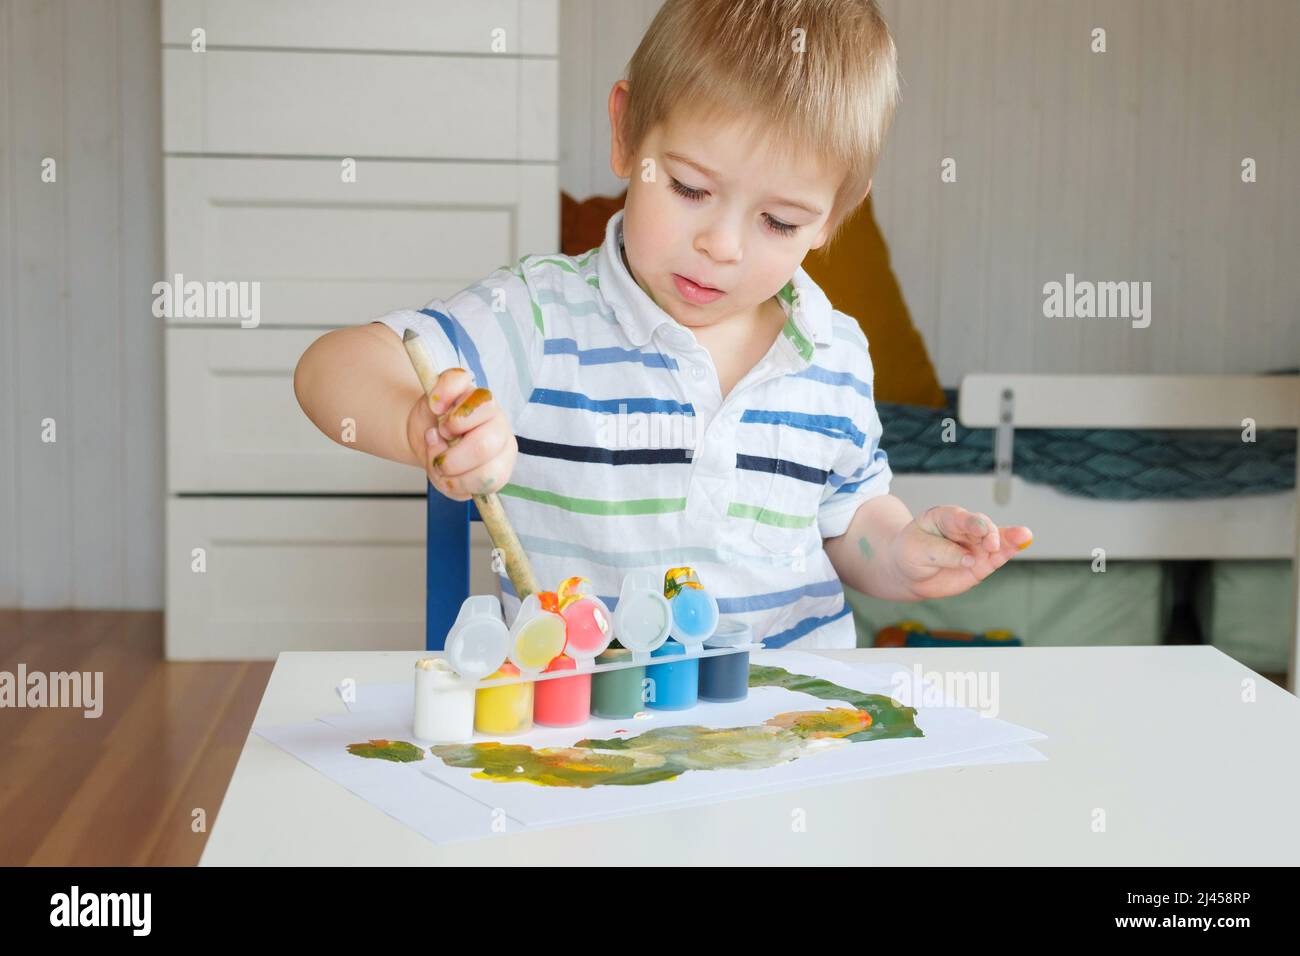 Little Boy Draws Picture On Paper. Preschool Child in striped clothes drawing with Paints at the Table at Home. Day. Real People. Creative little Kid. Stock Photo